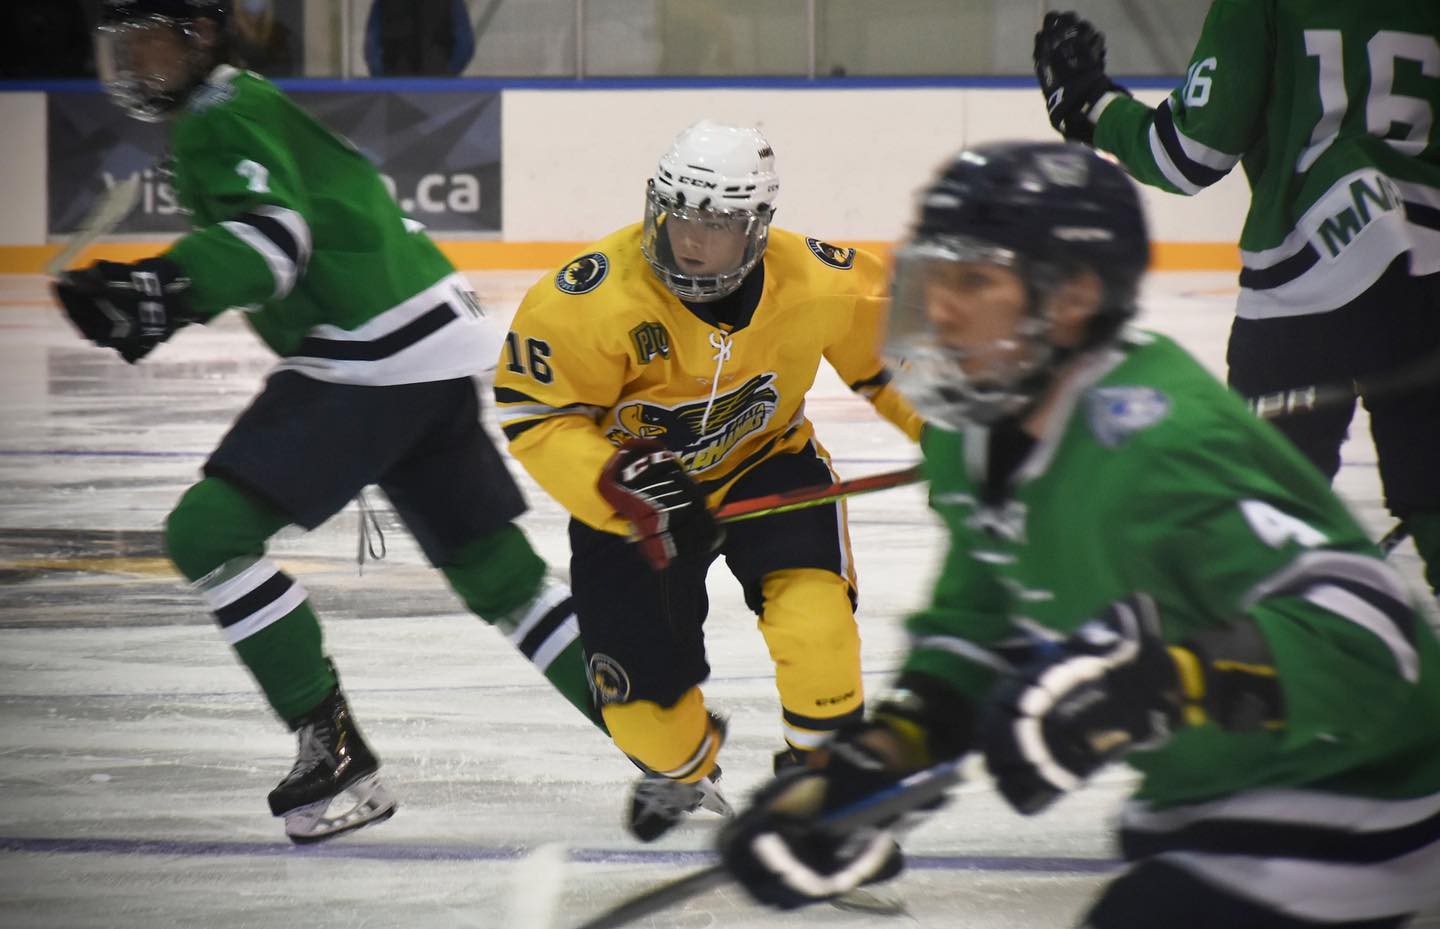 The Hawks have traded ‘04 F Luca Redford to the Victoria @cougarsjrhockey for future considerations. 

Thanks Luca for your time as a Hawk, and best of luck with the Cougars and at UVic! #DeltaHawkey